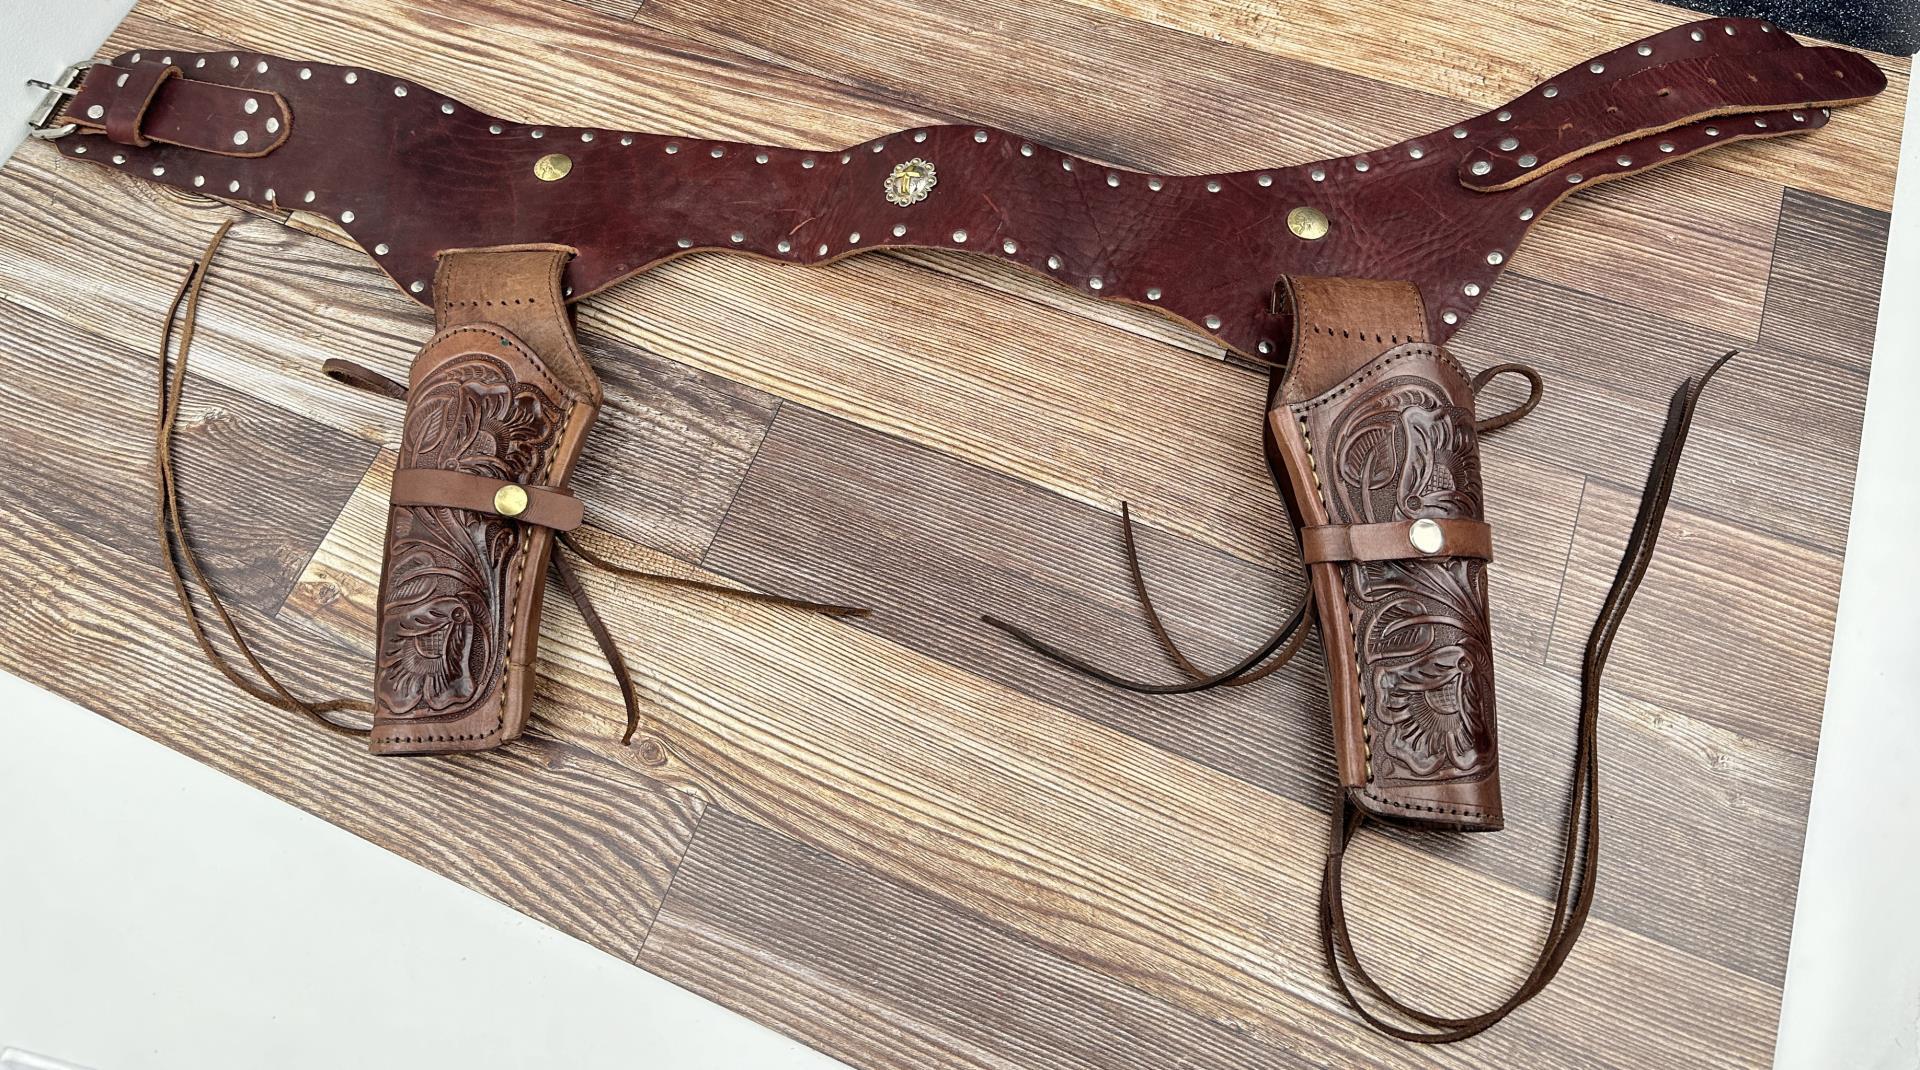 Custom Made Mexican Leather Gunfighter Belt